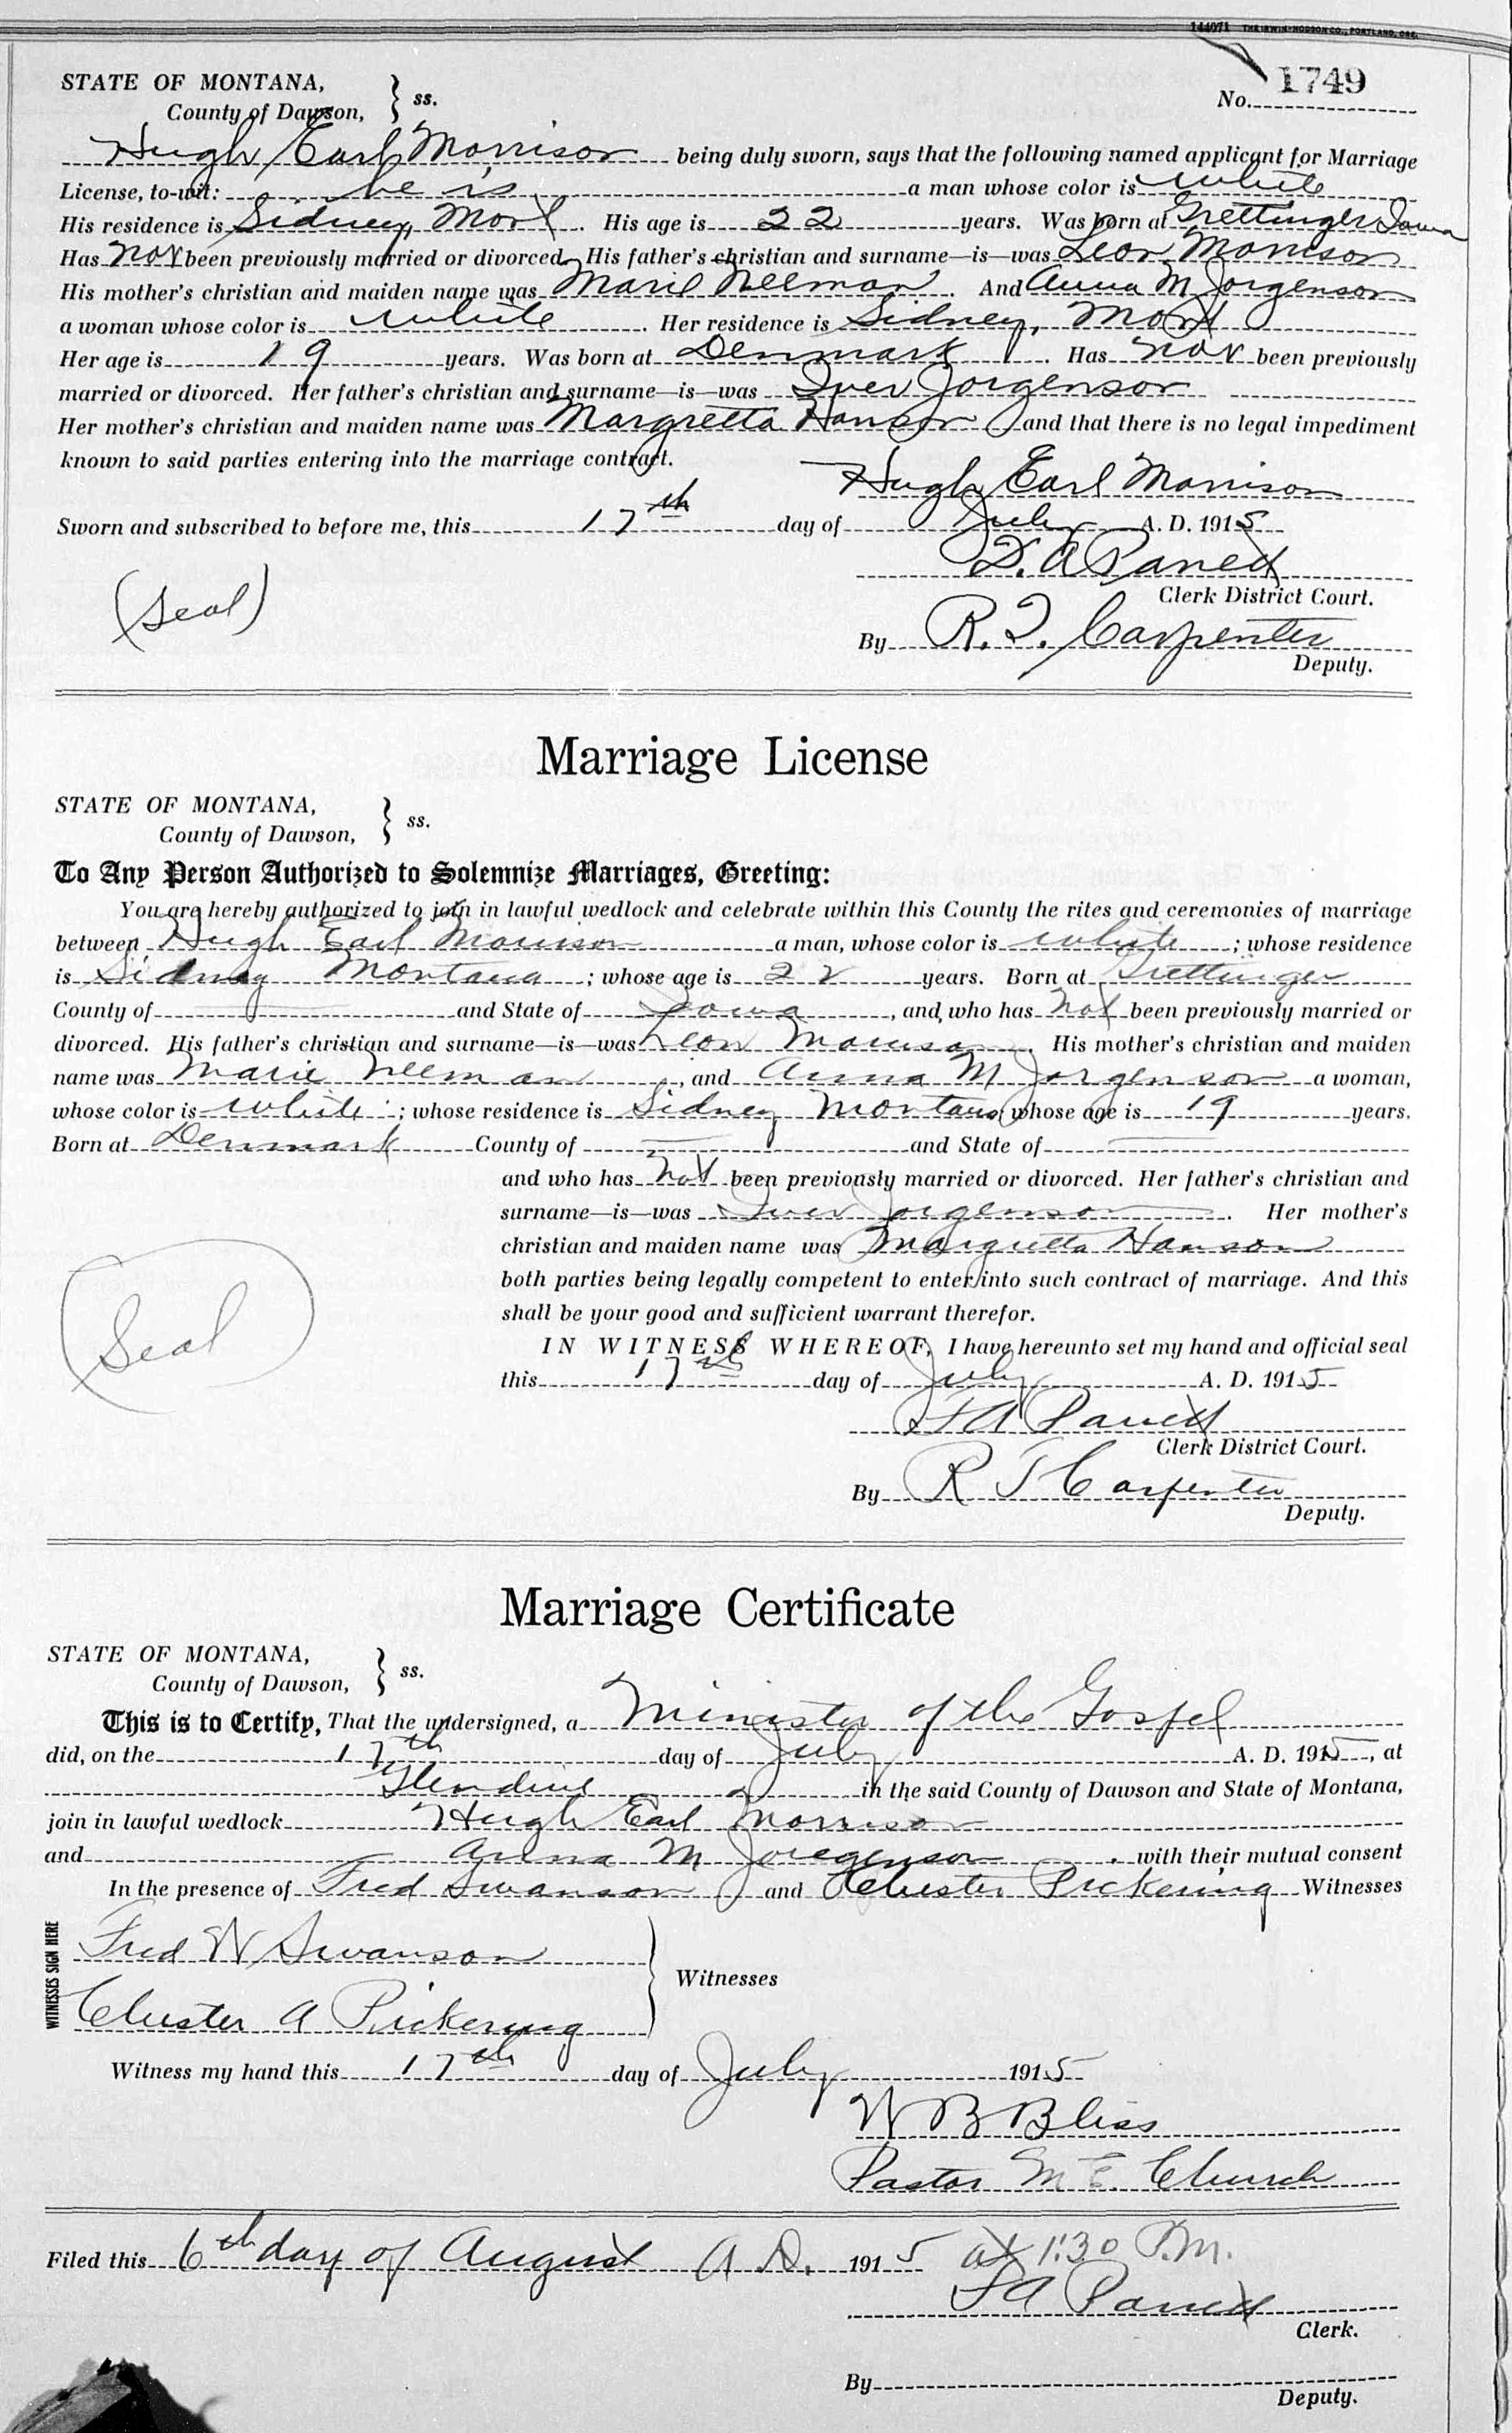 Marriage License and Certificate for Hugh Earl Morrison and Anna Jorgensen